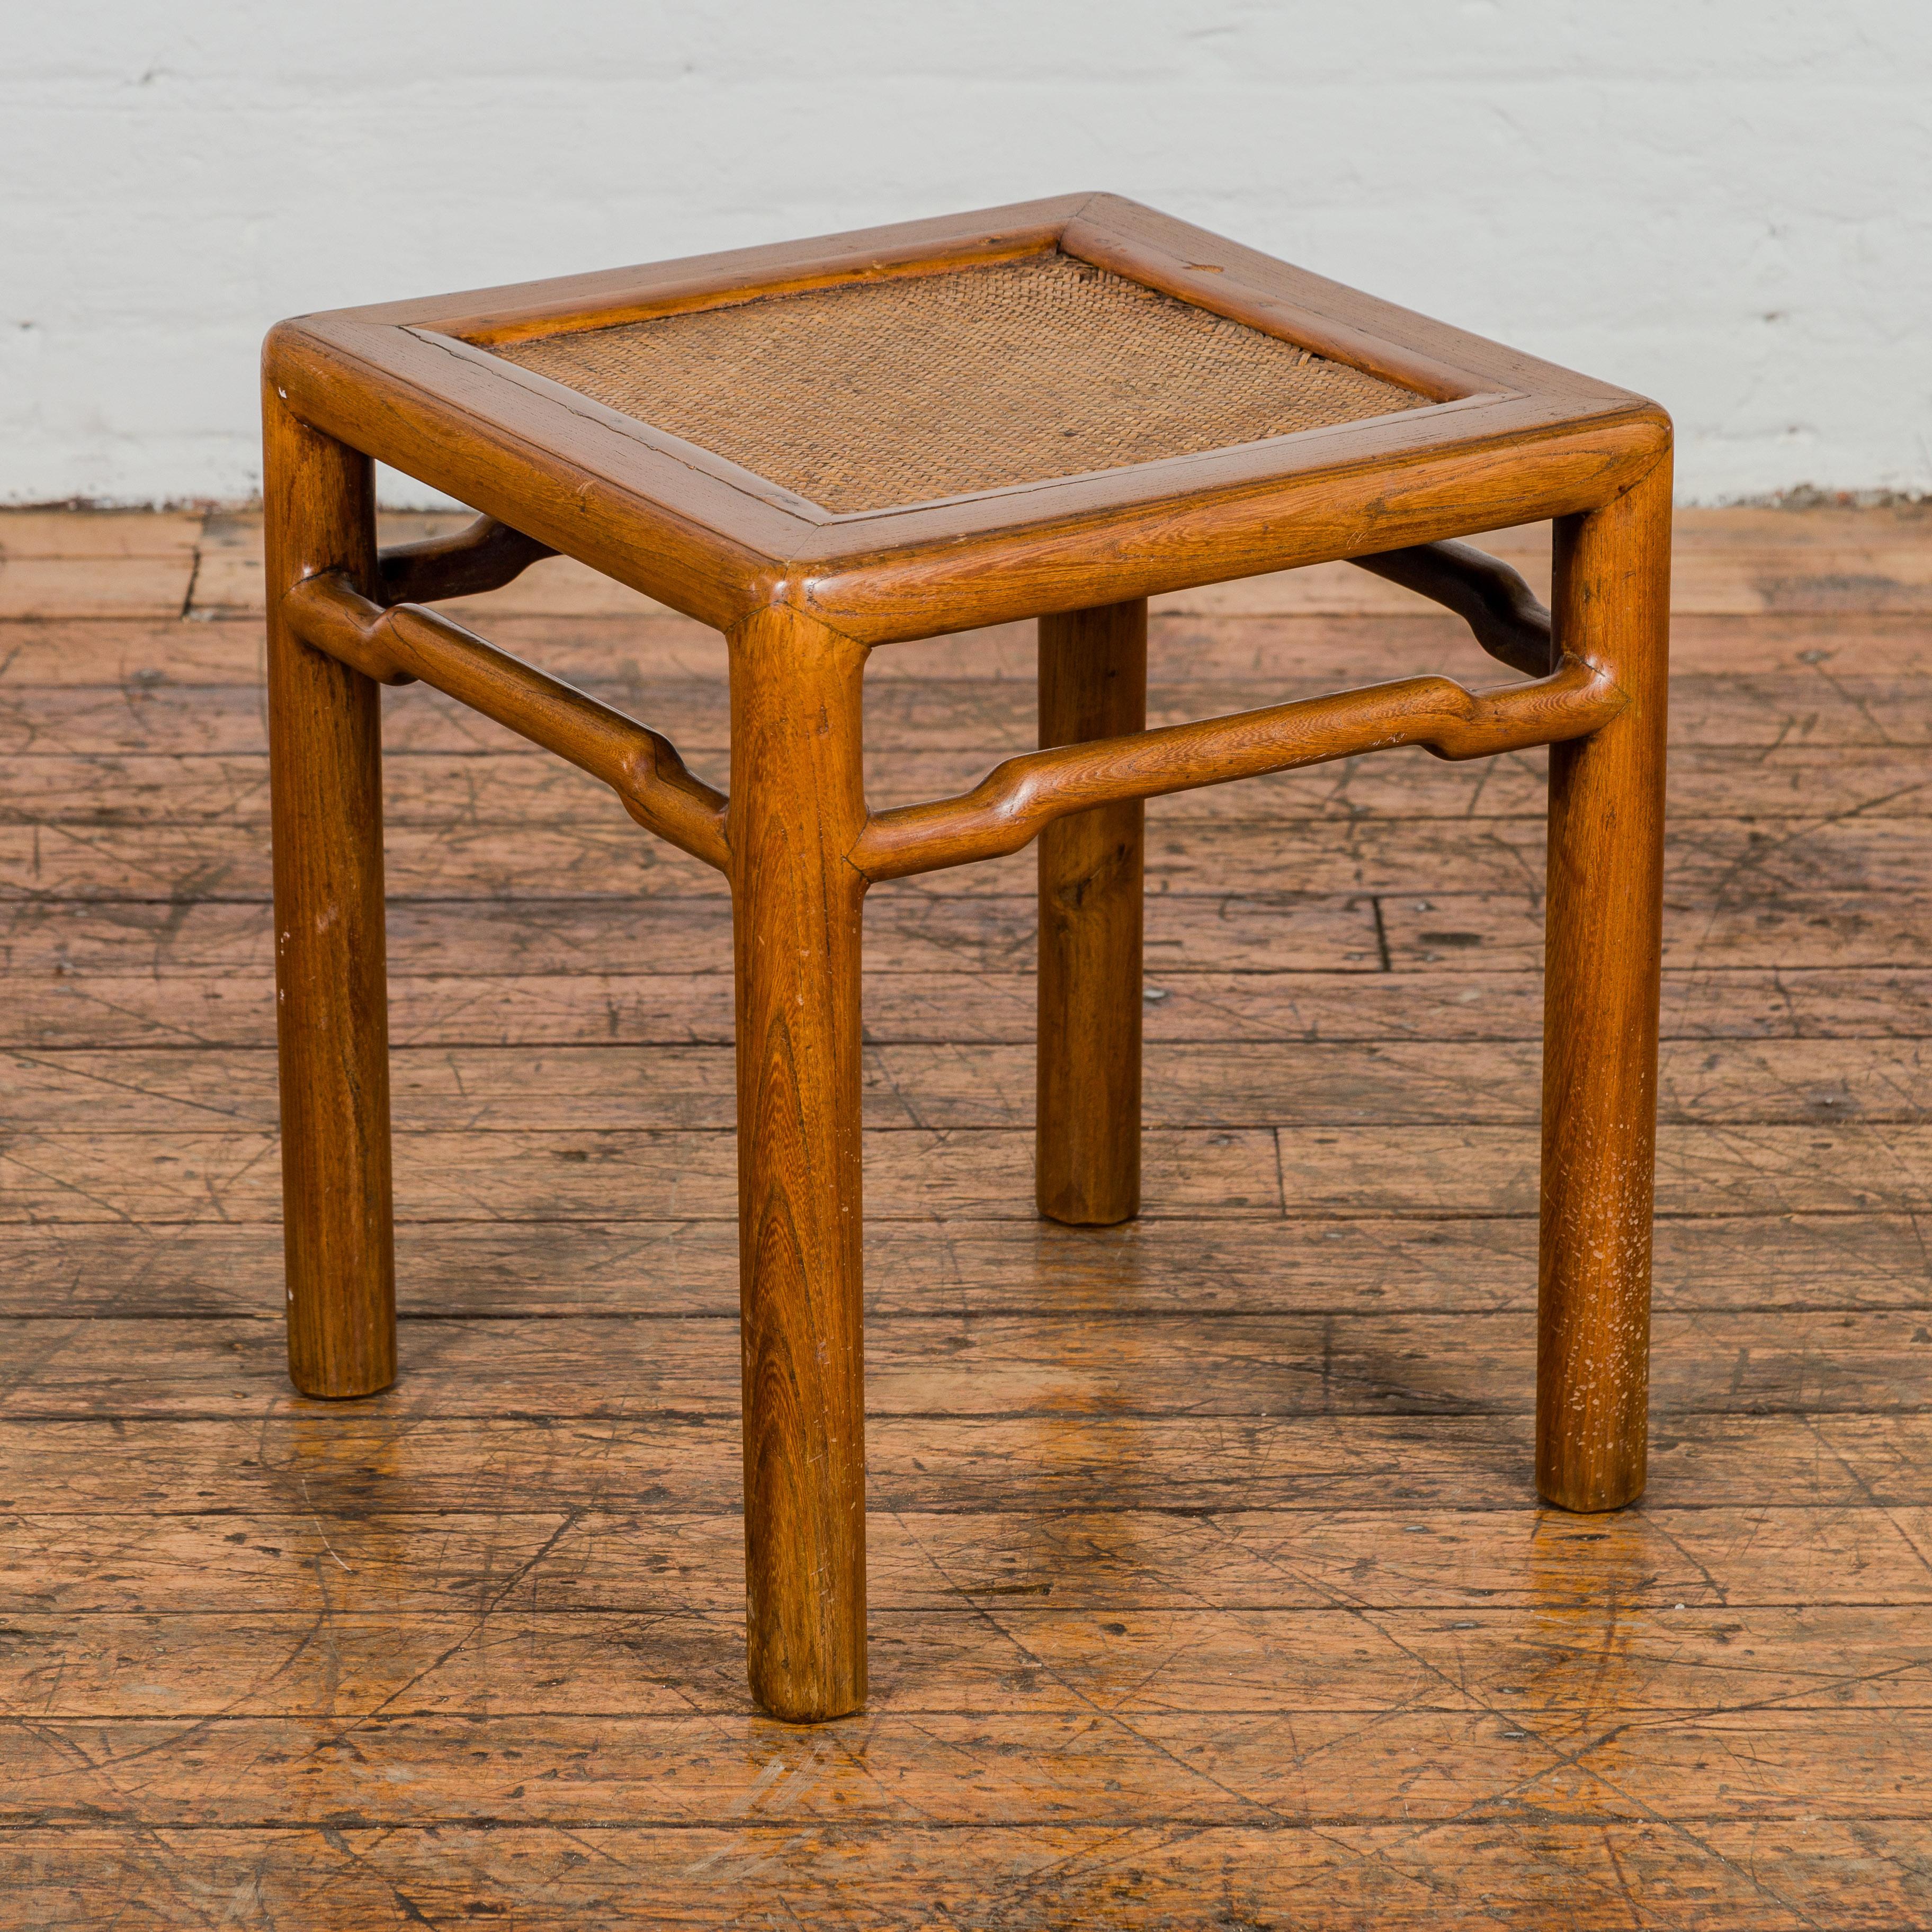 Qing Antique Small Square Side Table with Rattan Insert and Humpback Stretcher For Sale